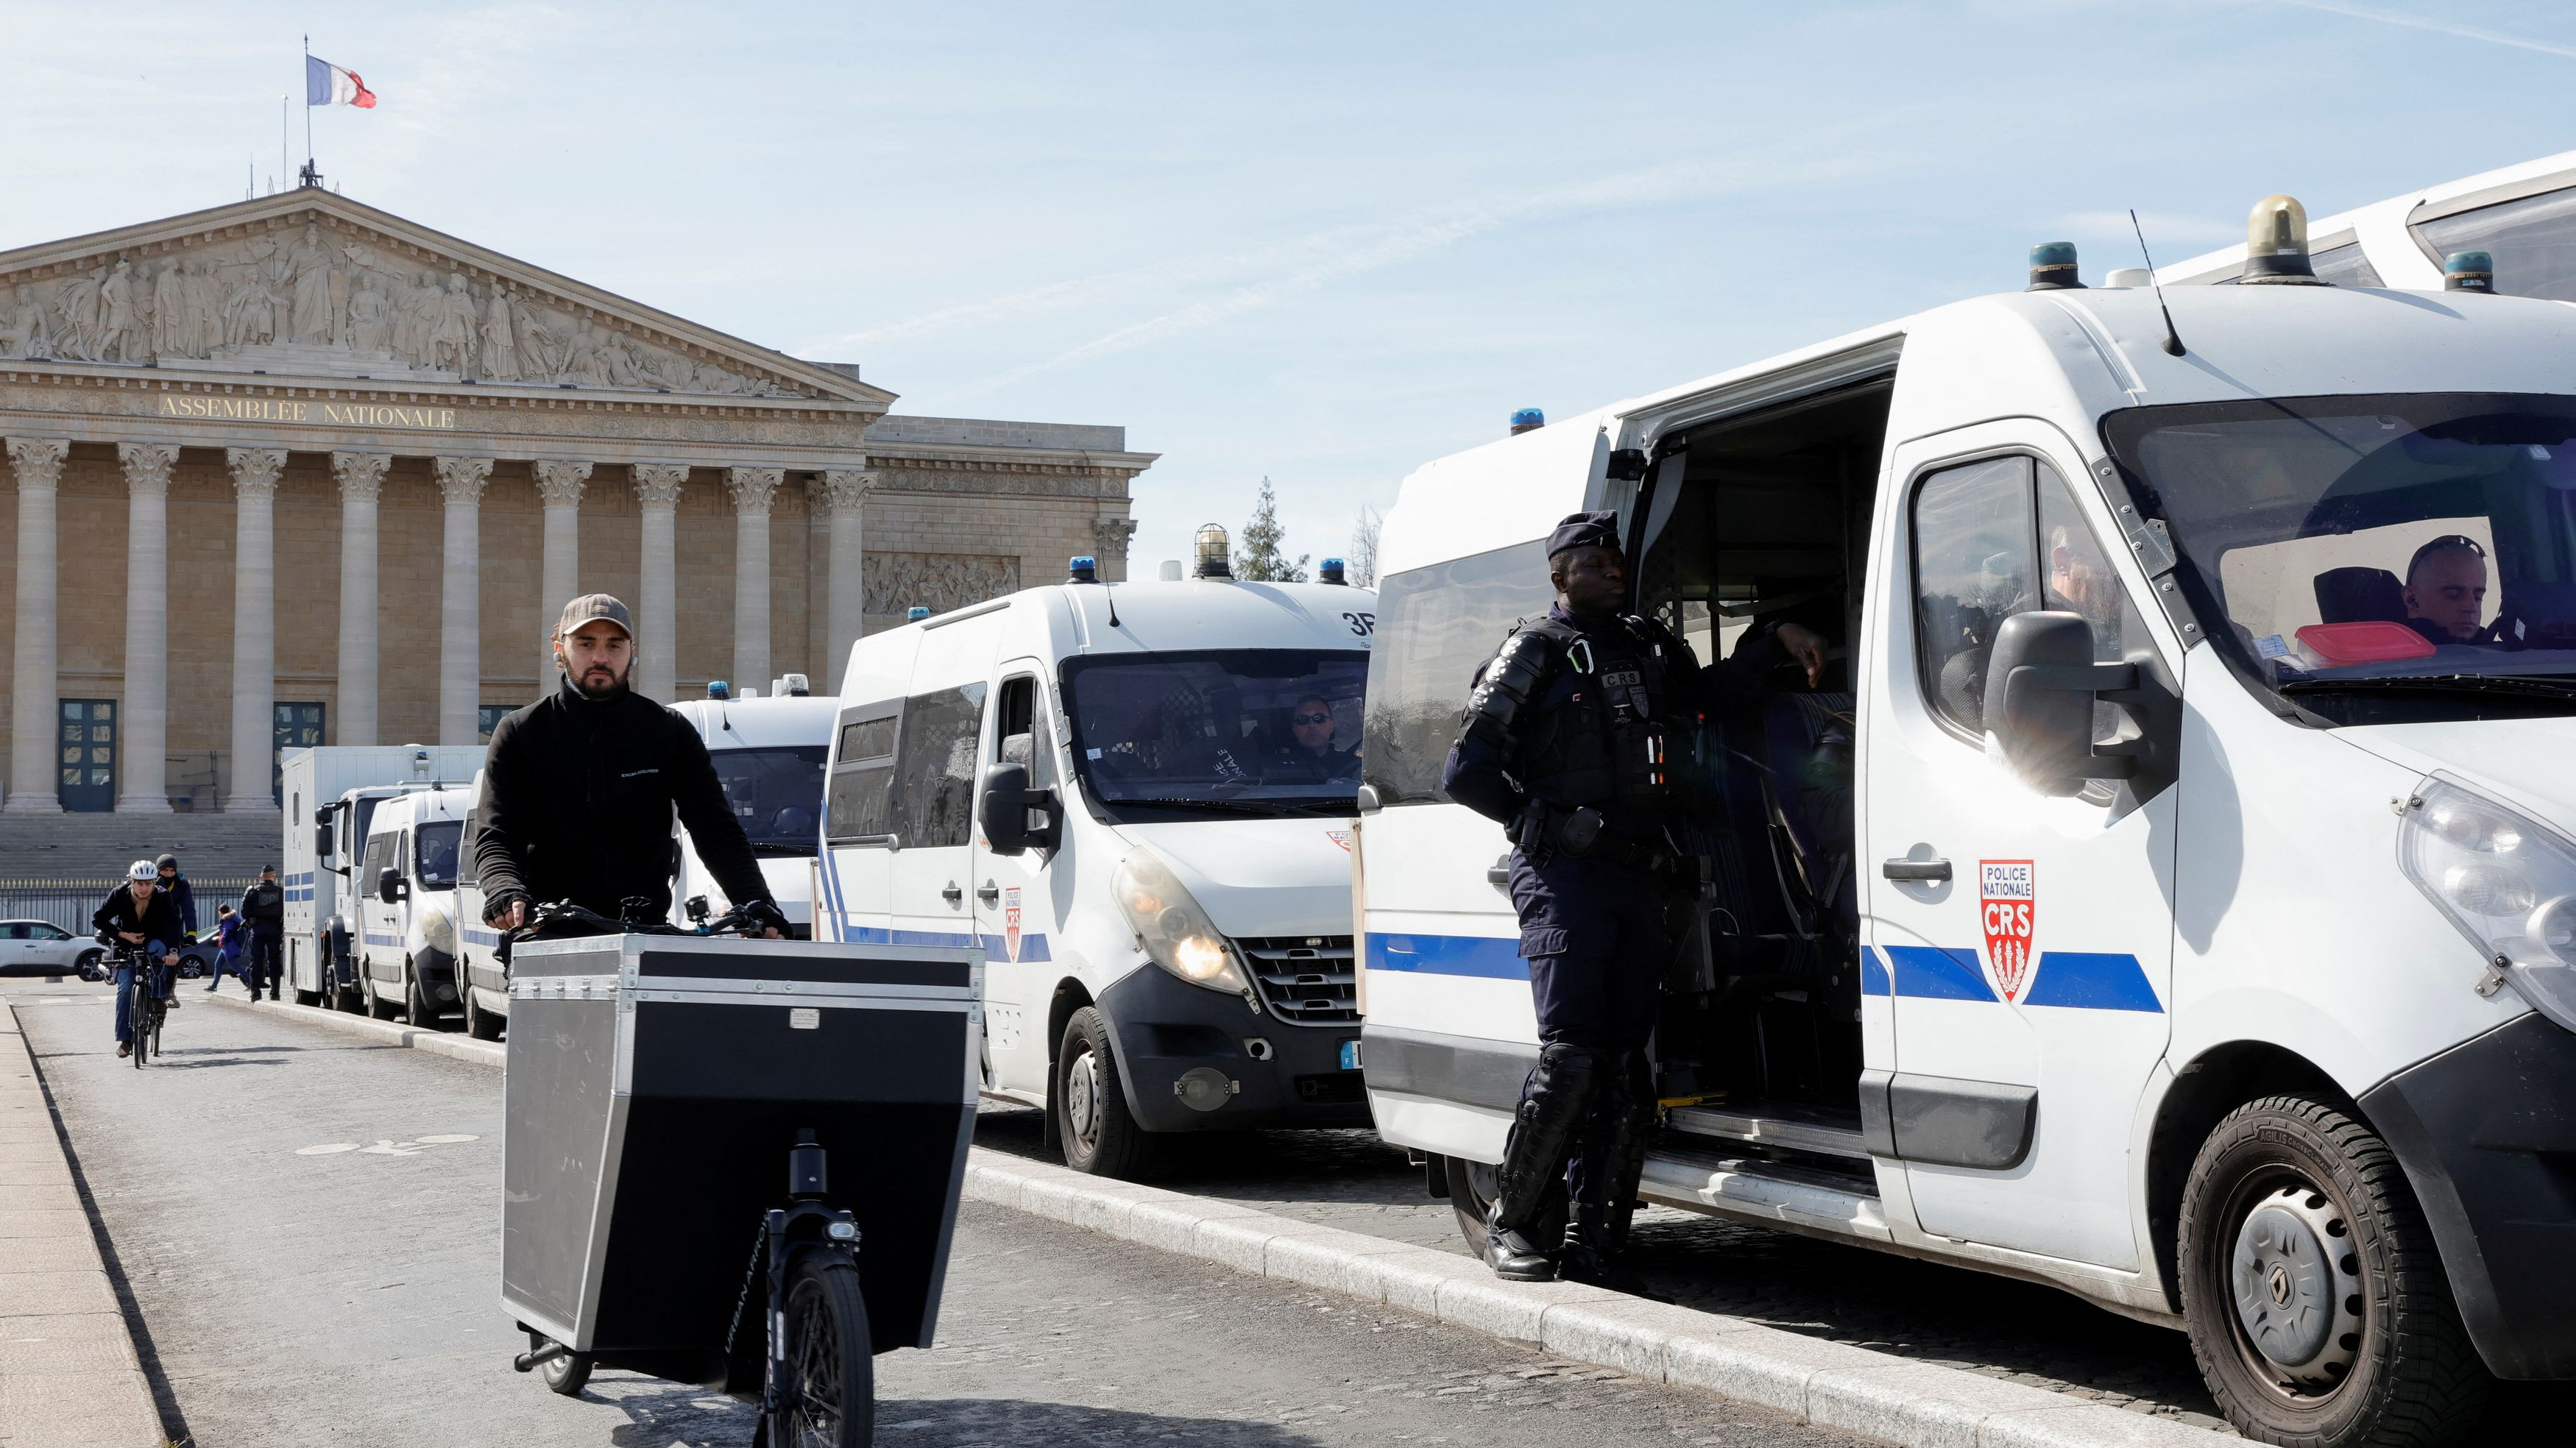 French CRS riot police stand guard in front of the National Assembly in Paris, France, March 16, 2023. /Reuters